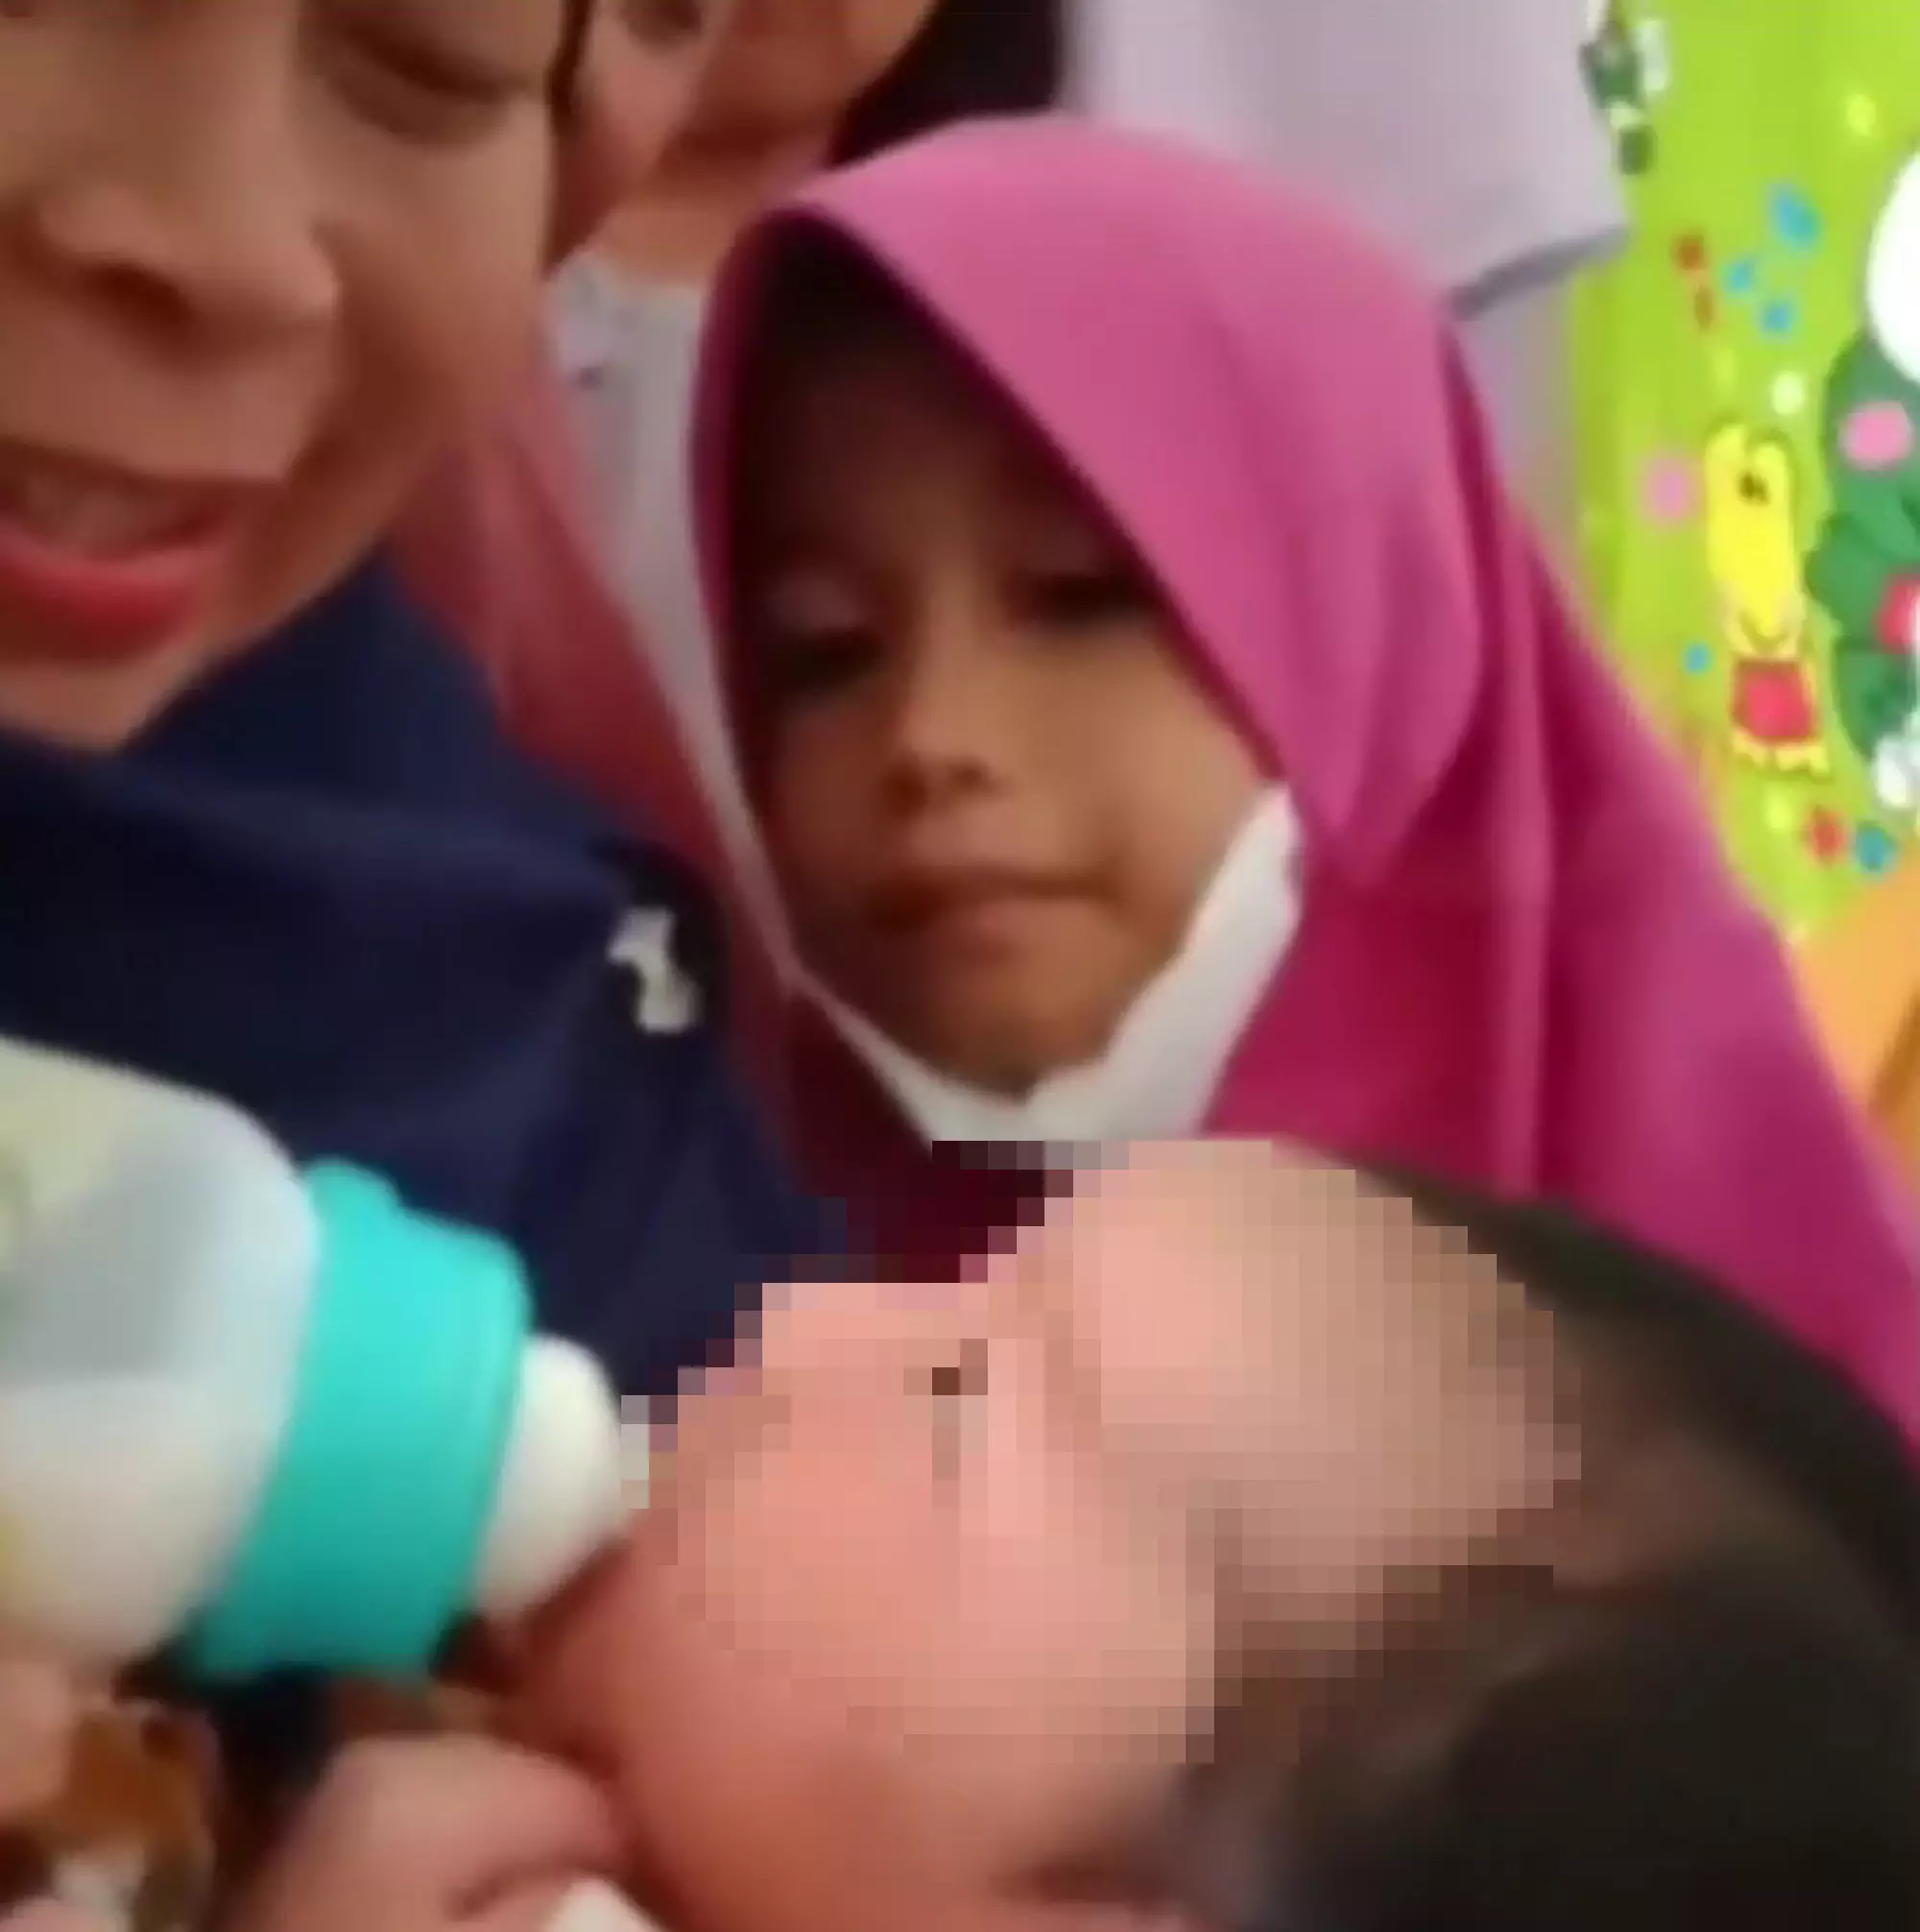 The baby that Siti gave birth to.